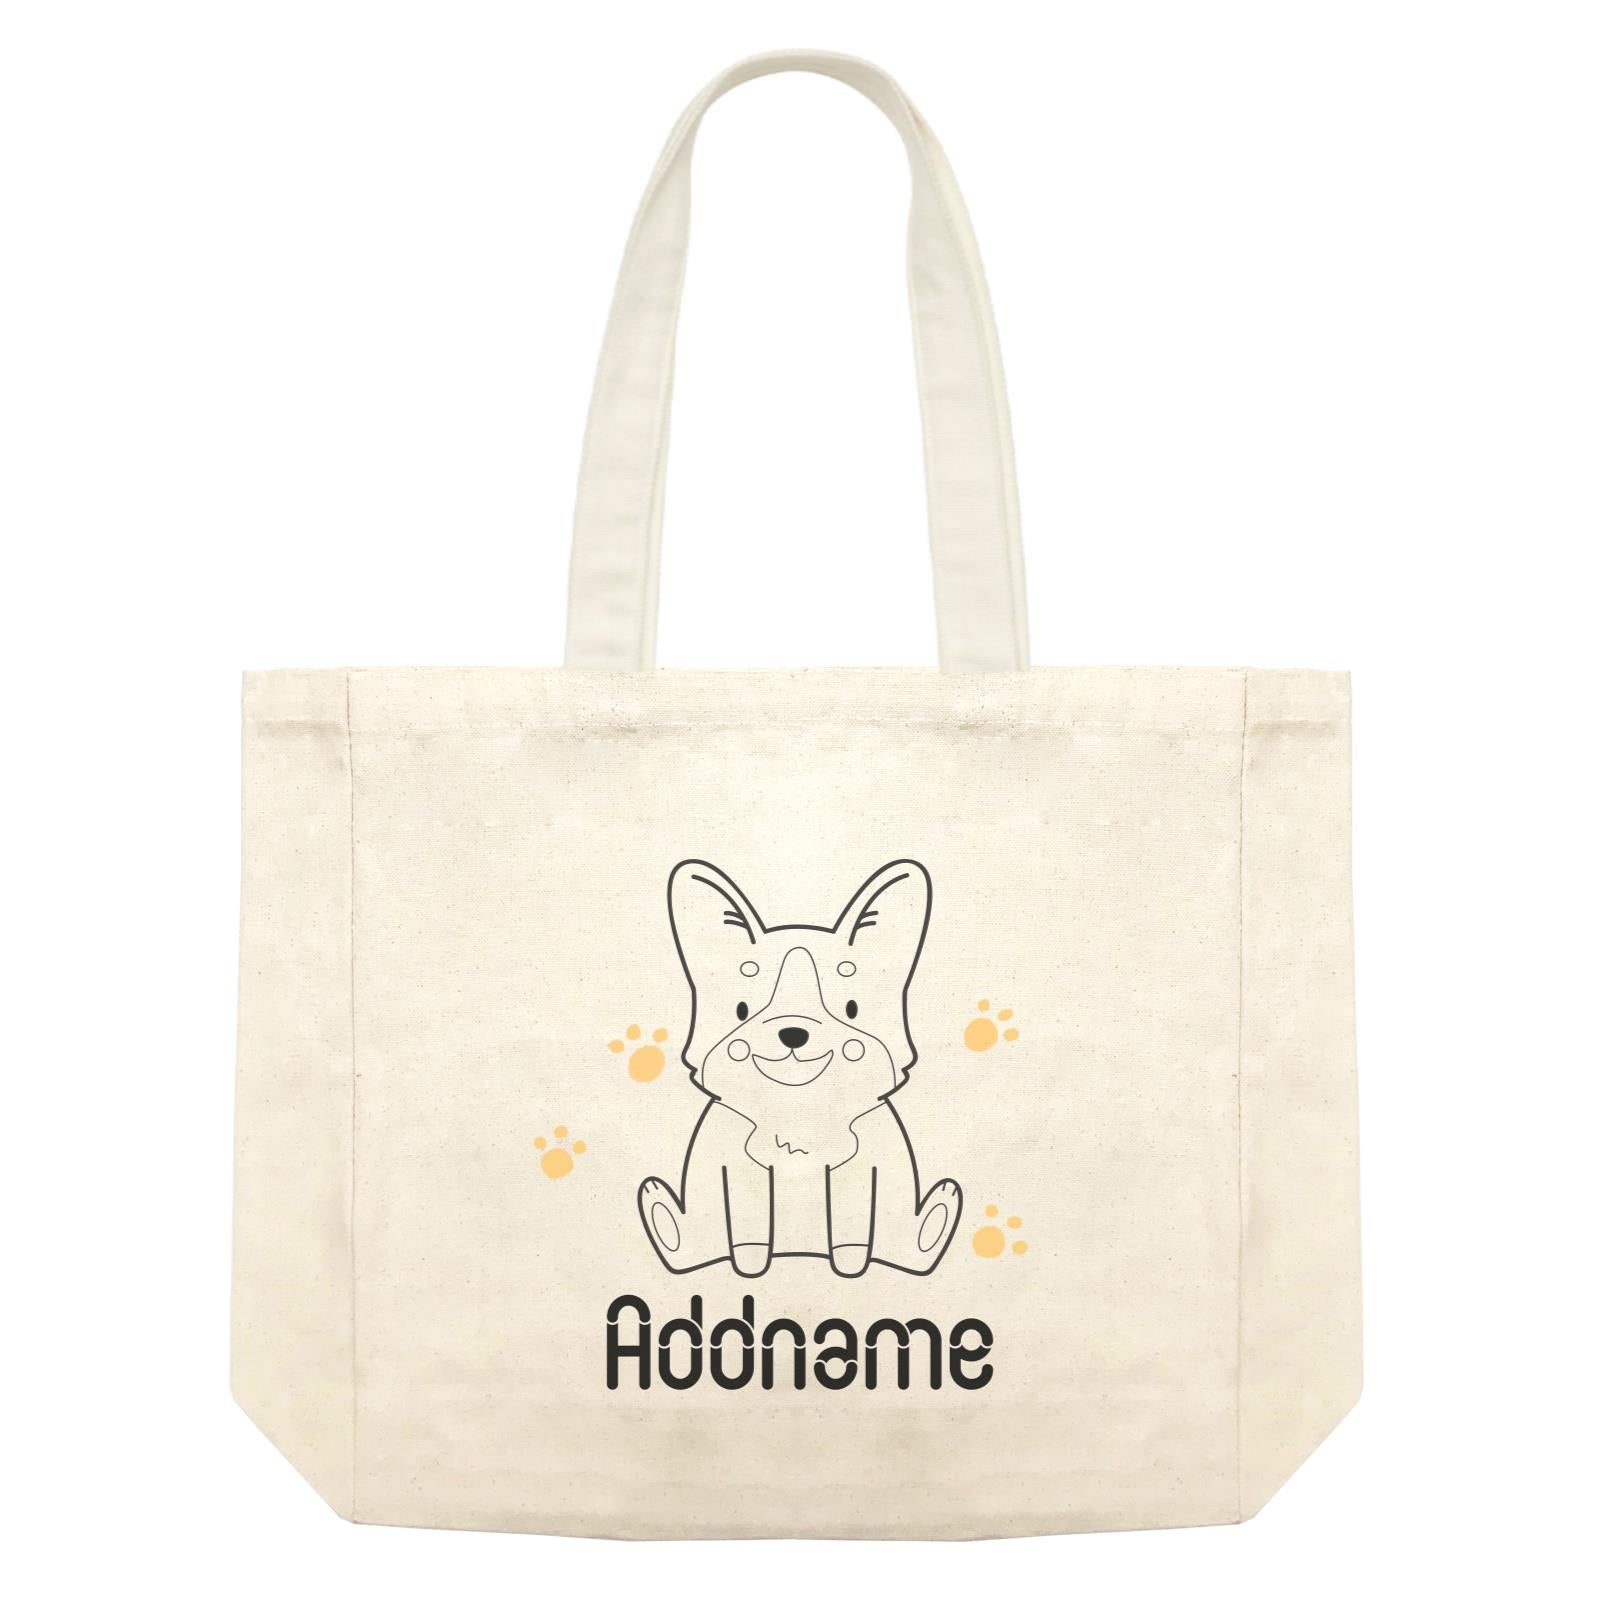 Coloring Outline Cute Hand Drawn Animals Dogs Corgi Addname Shopping Bag